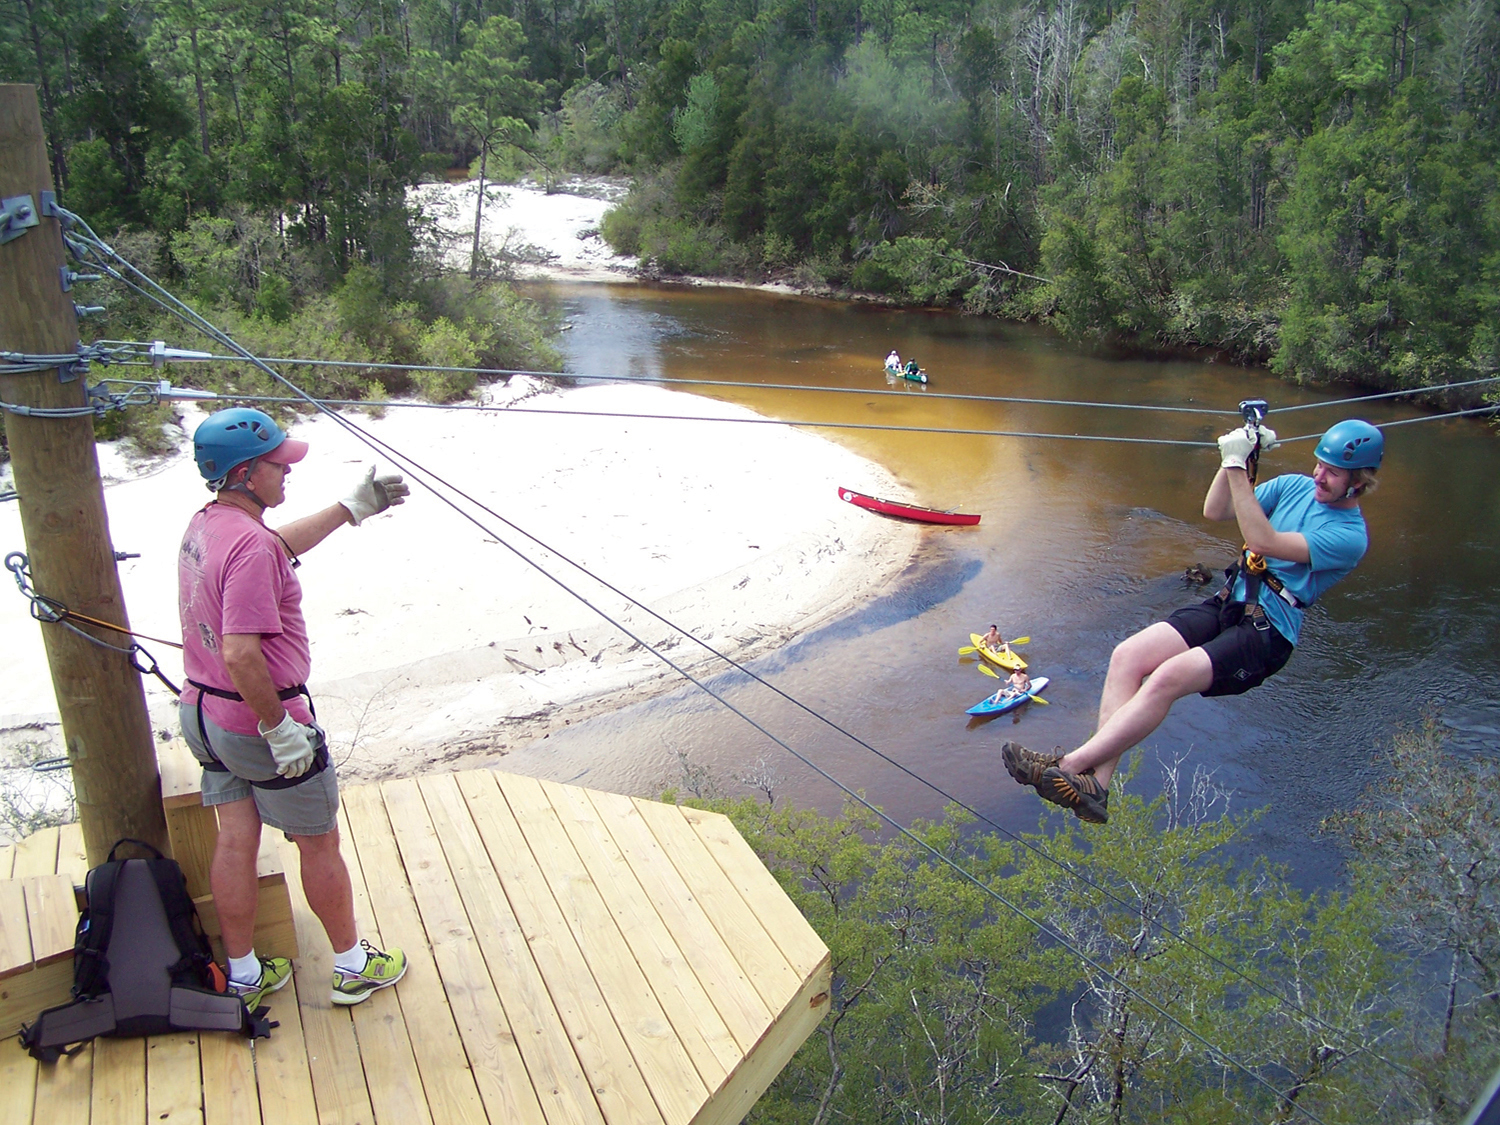 Ziplining over Coldwater Creek with Adventures Unlimited.